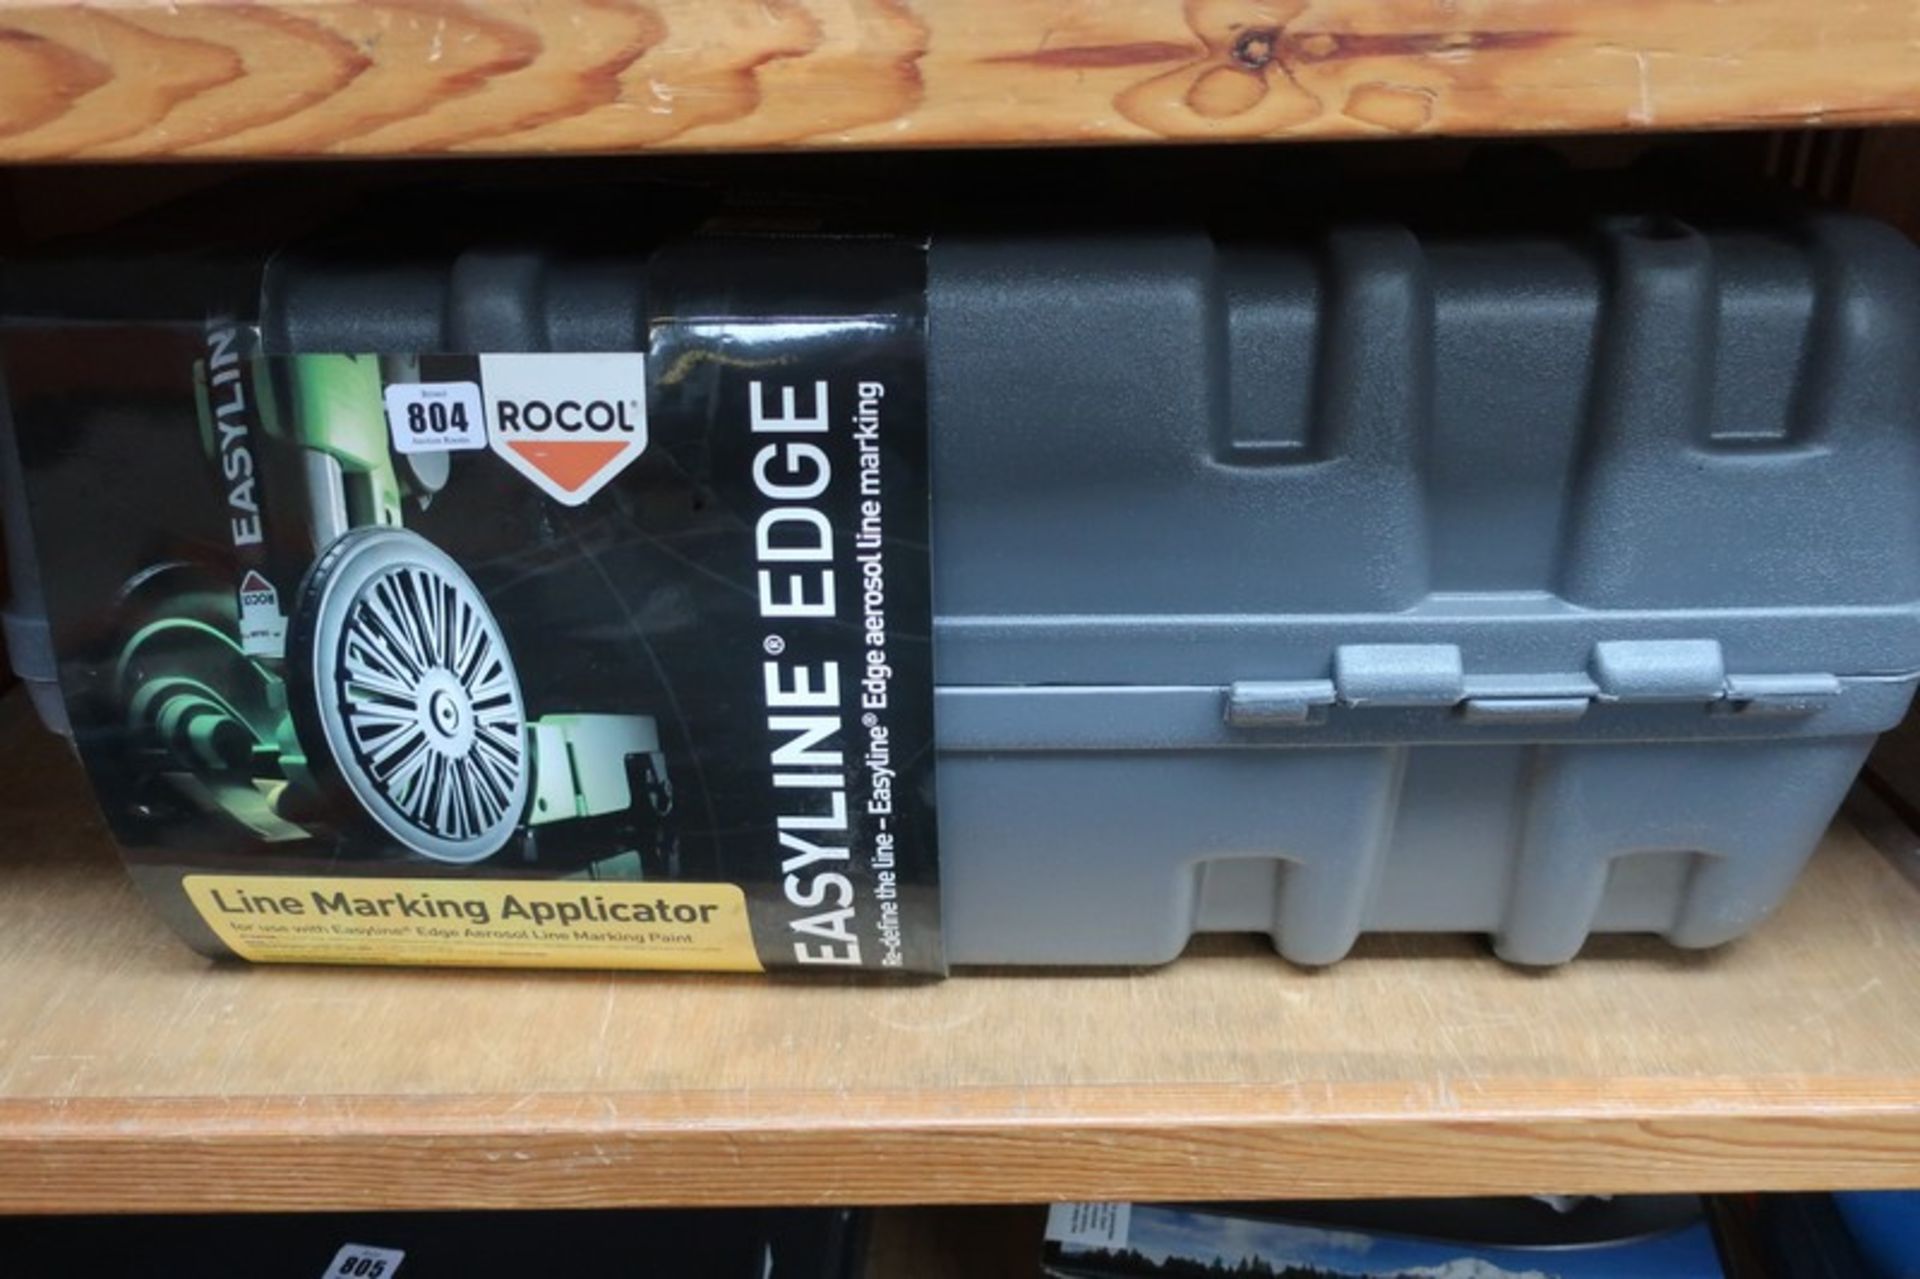 A boxed Rocol floor marking applicator (Some damage).